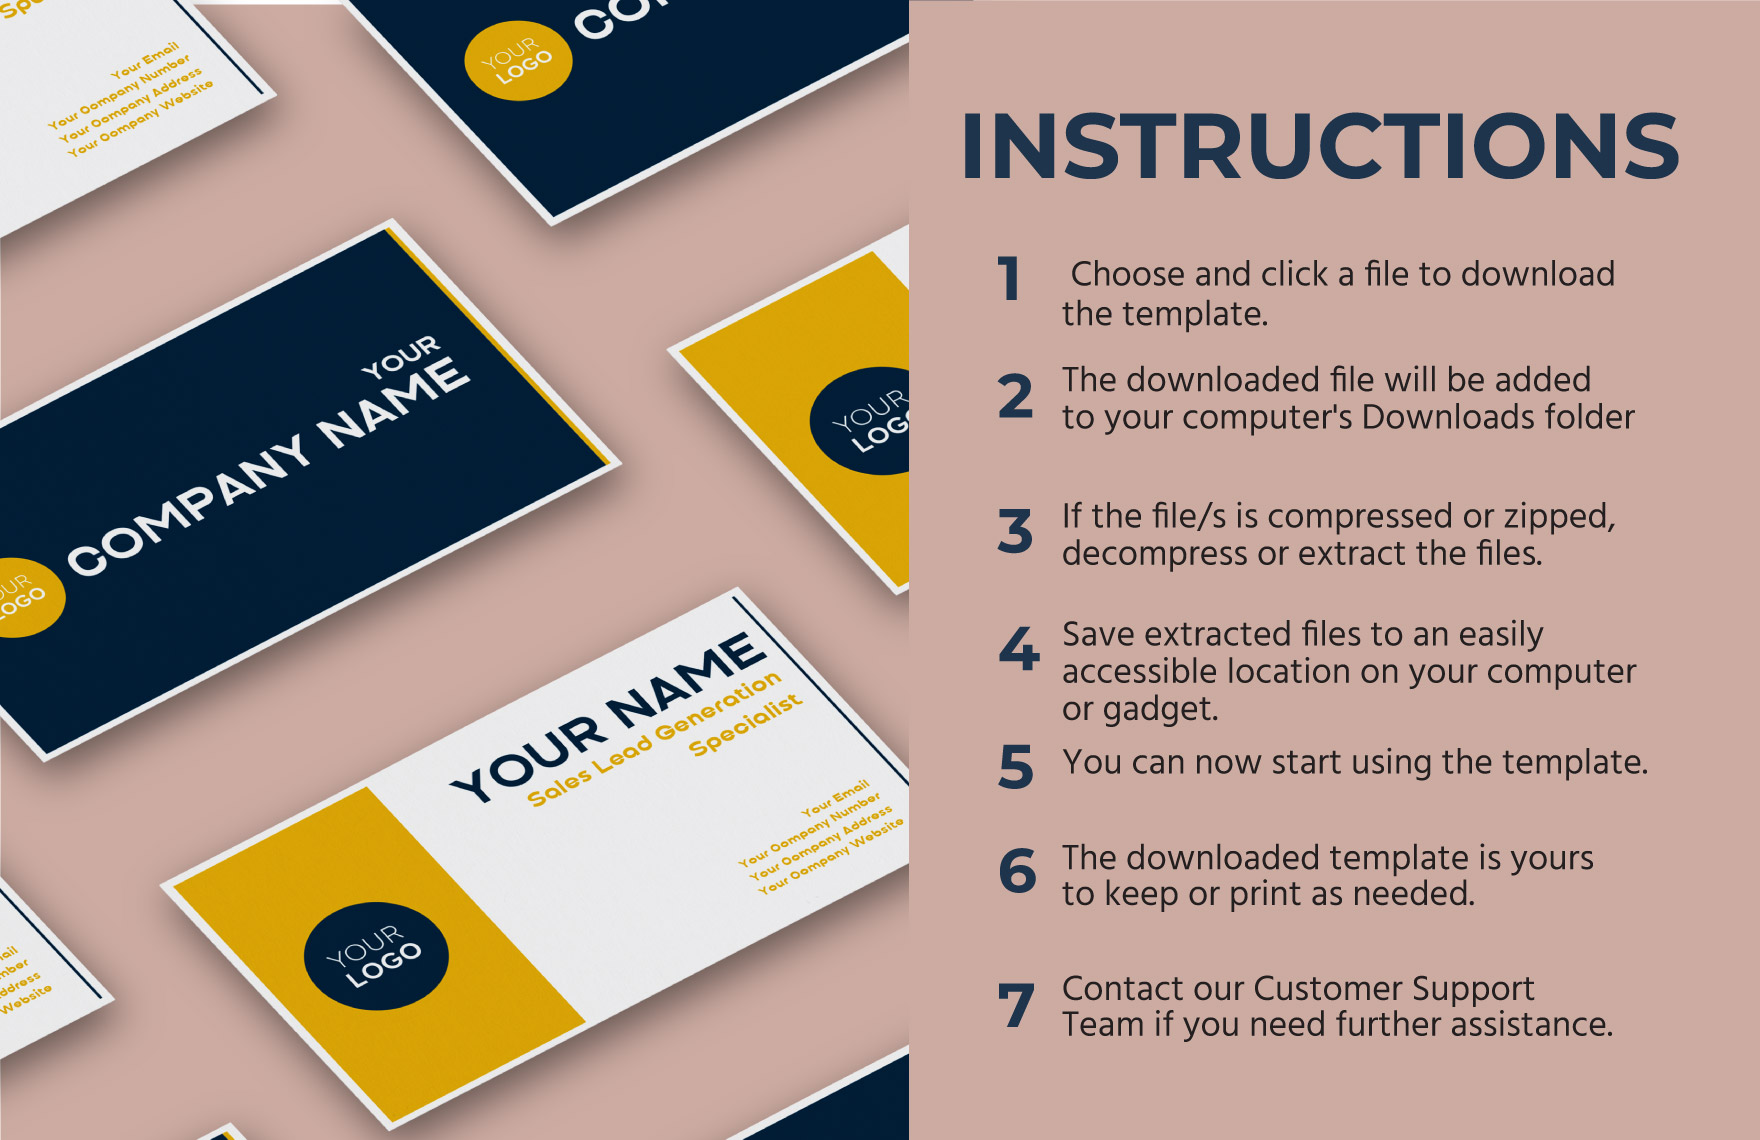 Sales Lead Generation Specialist Business Card Template